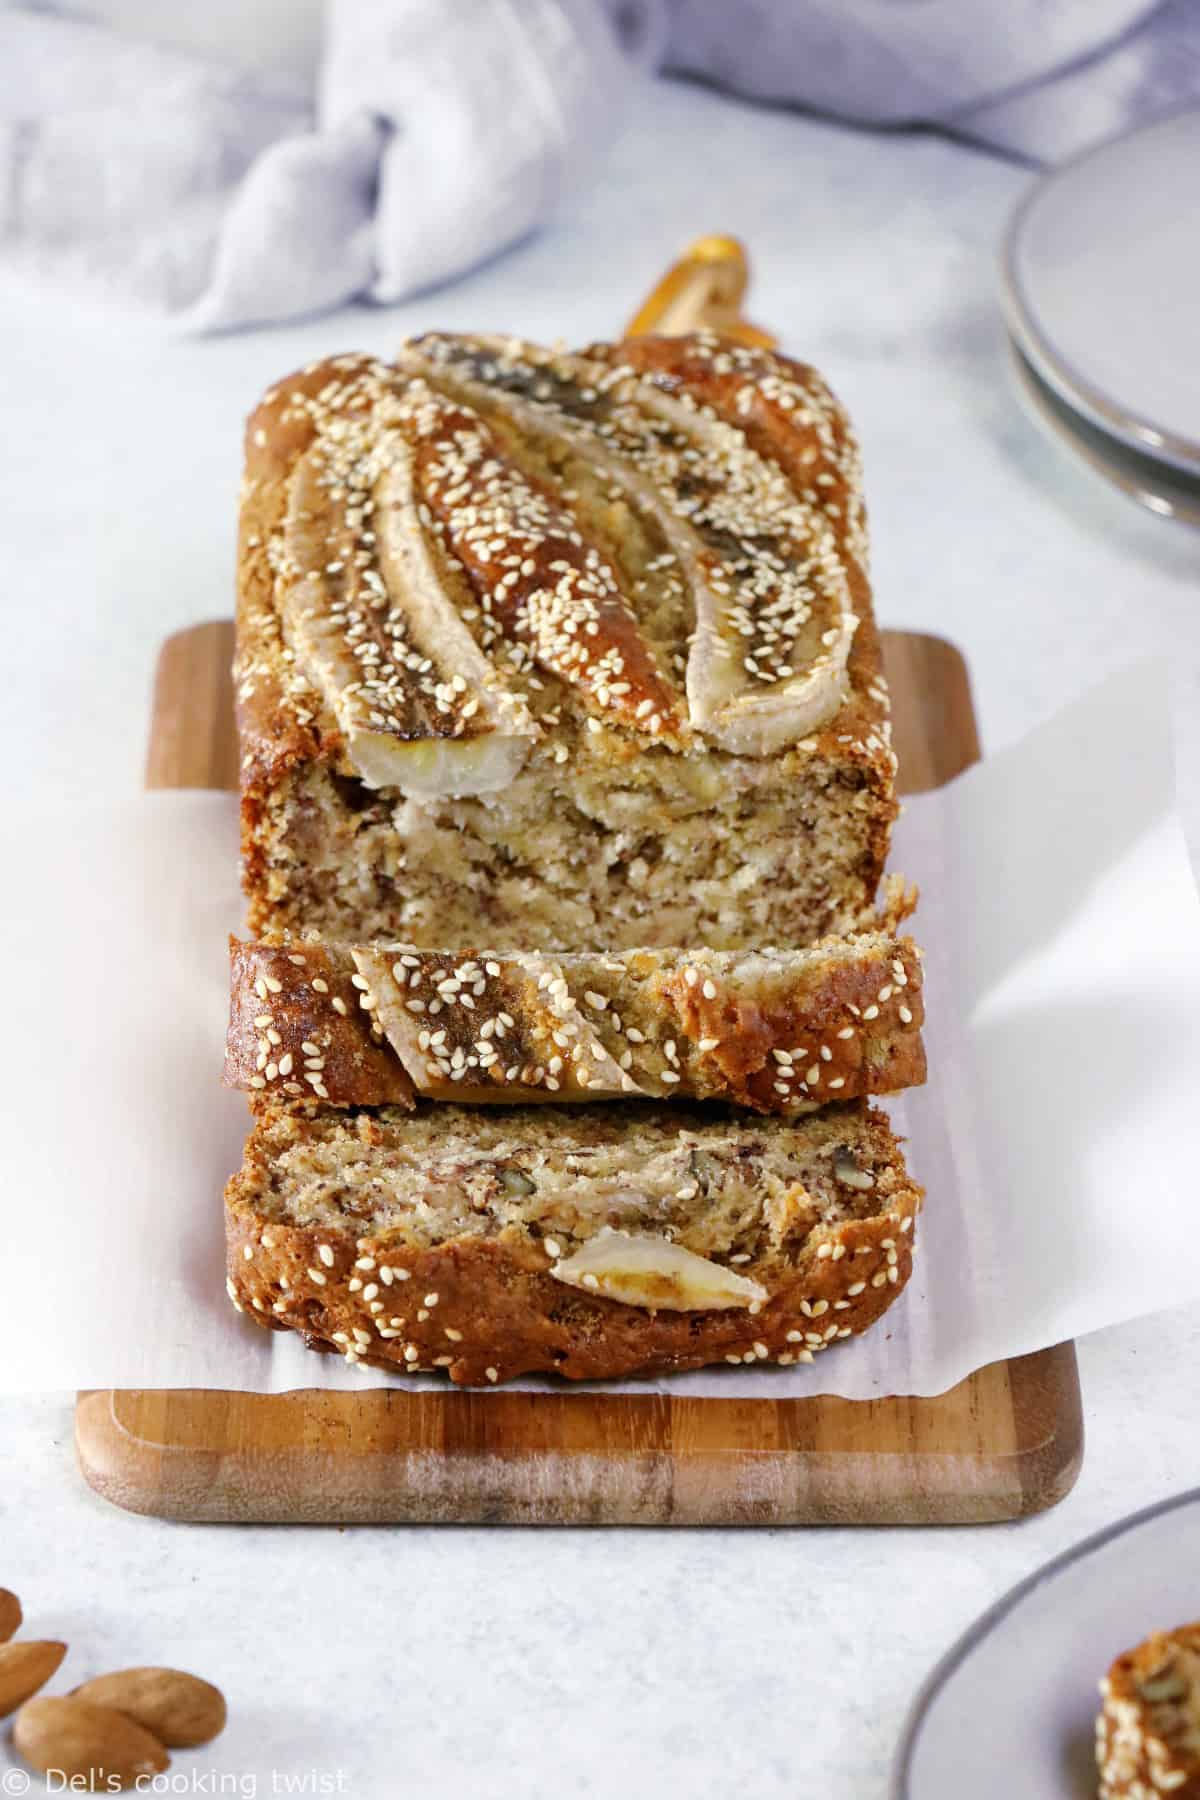 Perfect vegan banana bread has a light and moist texture, holds its shape beautifully, and takes less than 10 minutes to whip up with just a few basic ingredients.